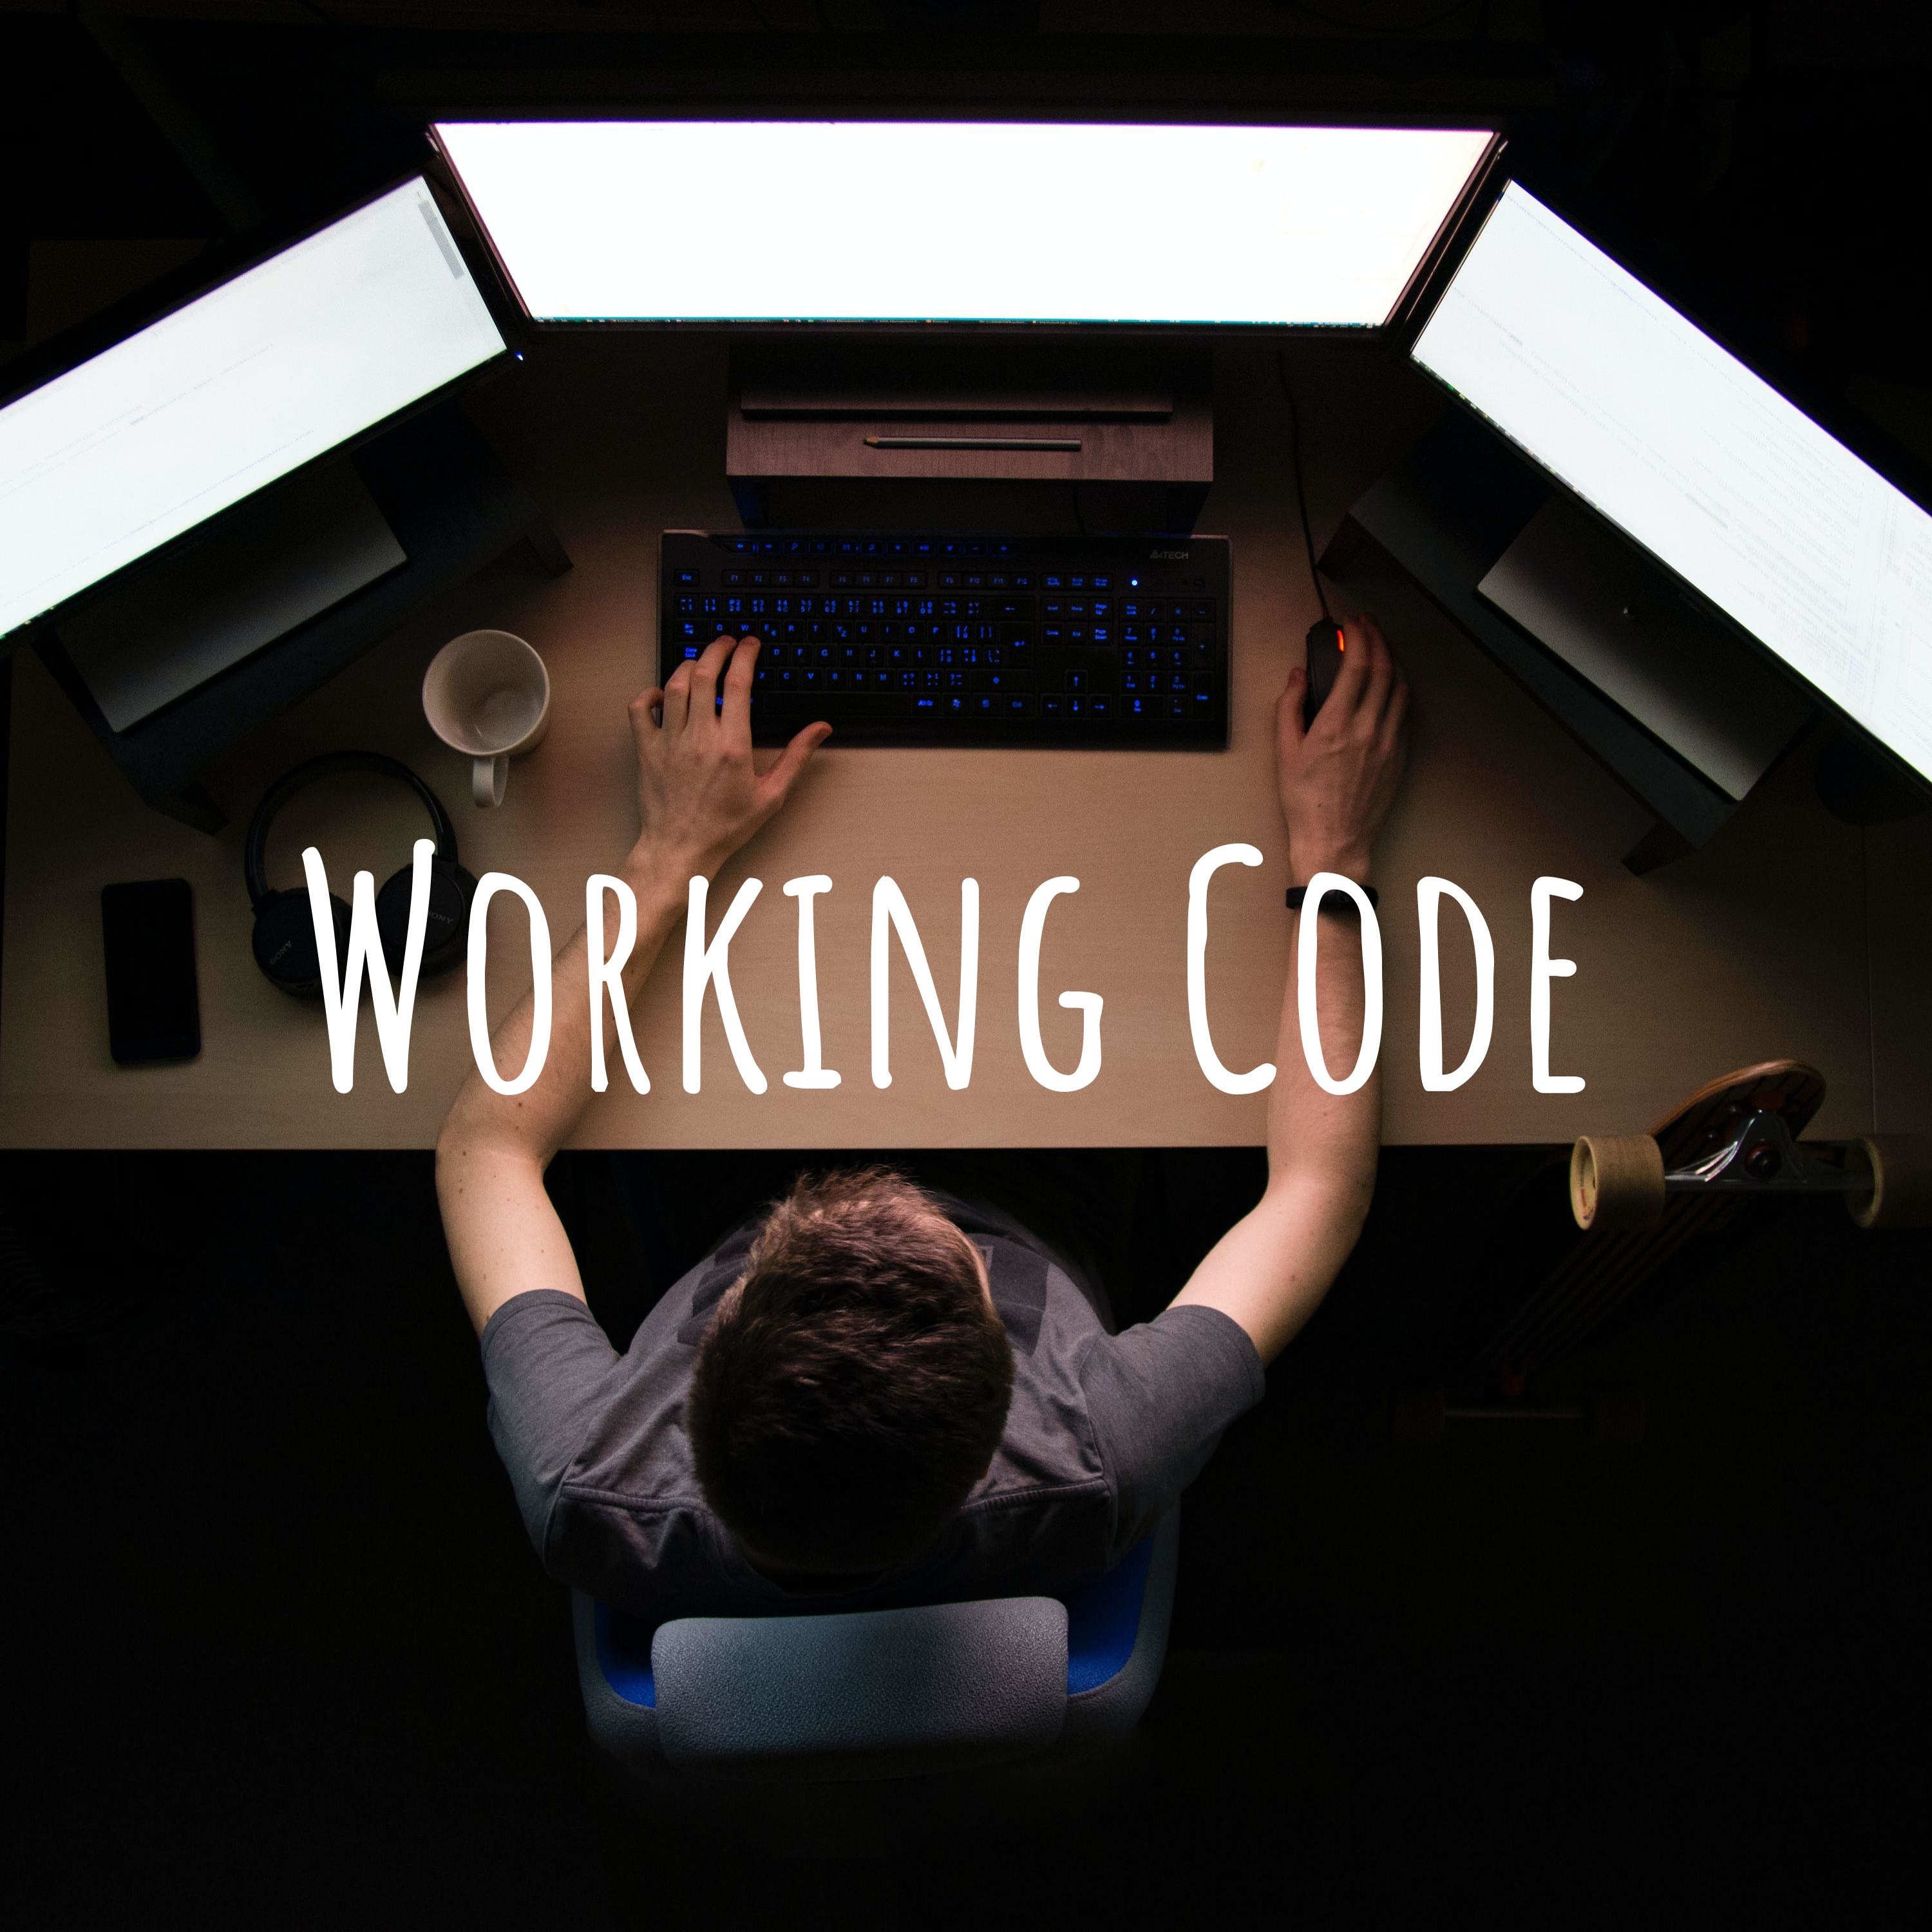 086: The Working Code Test